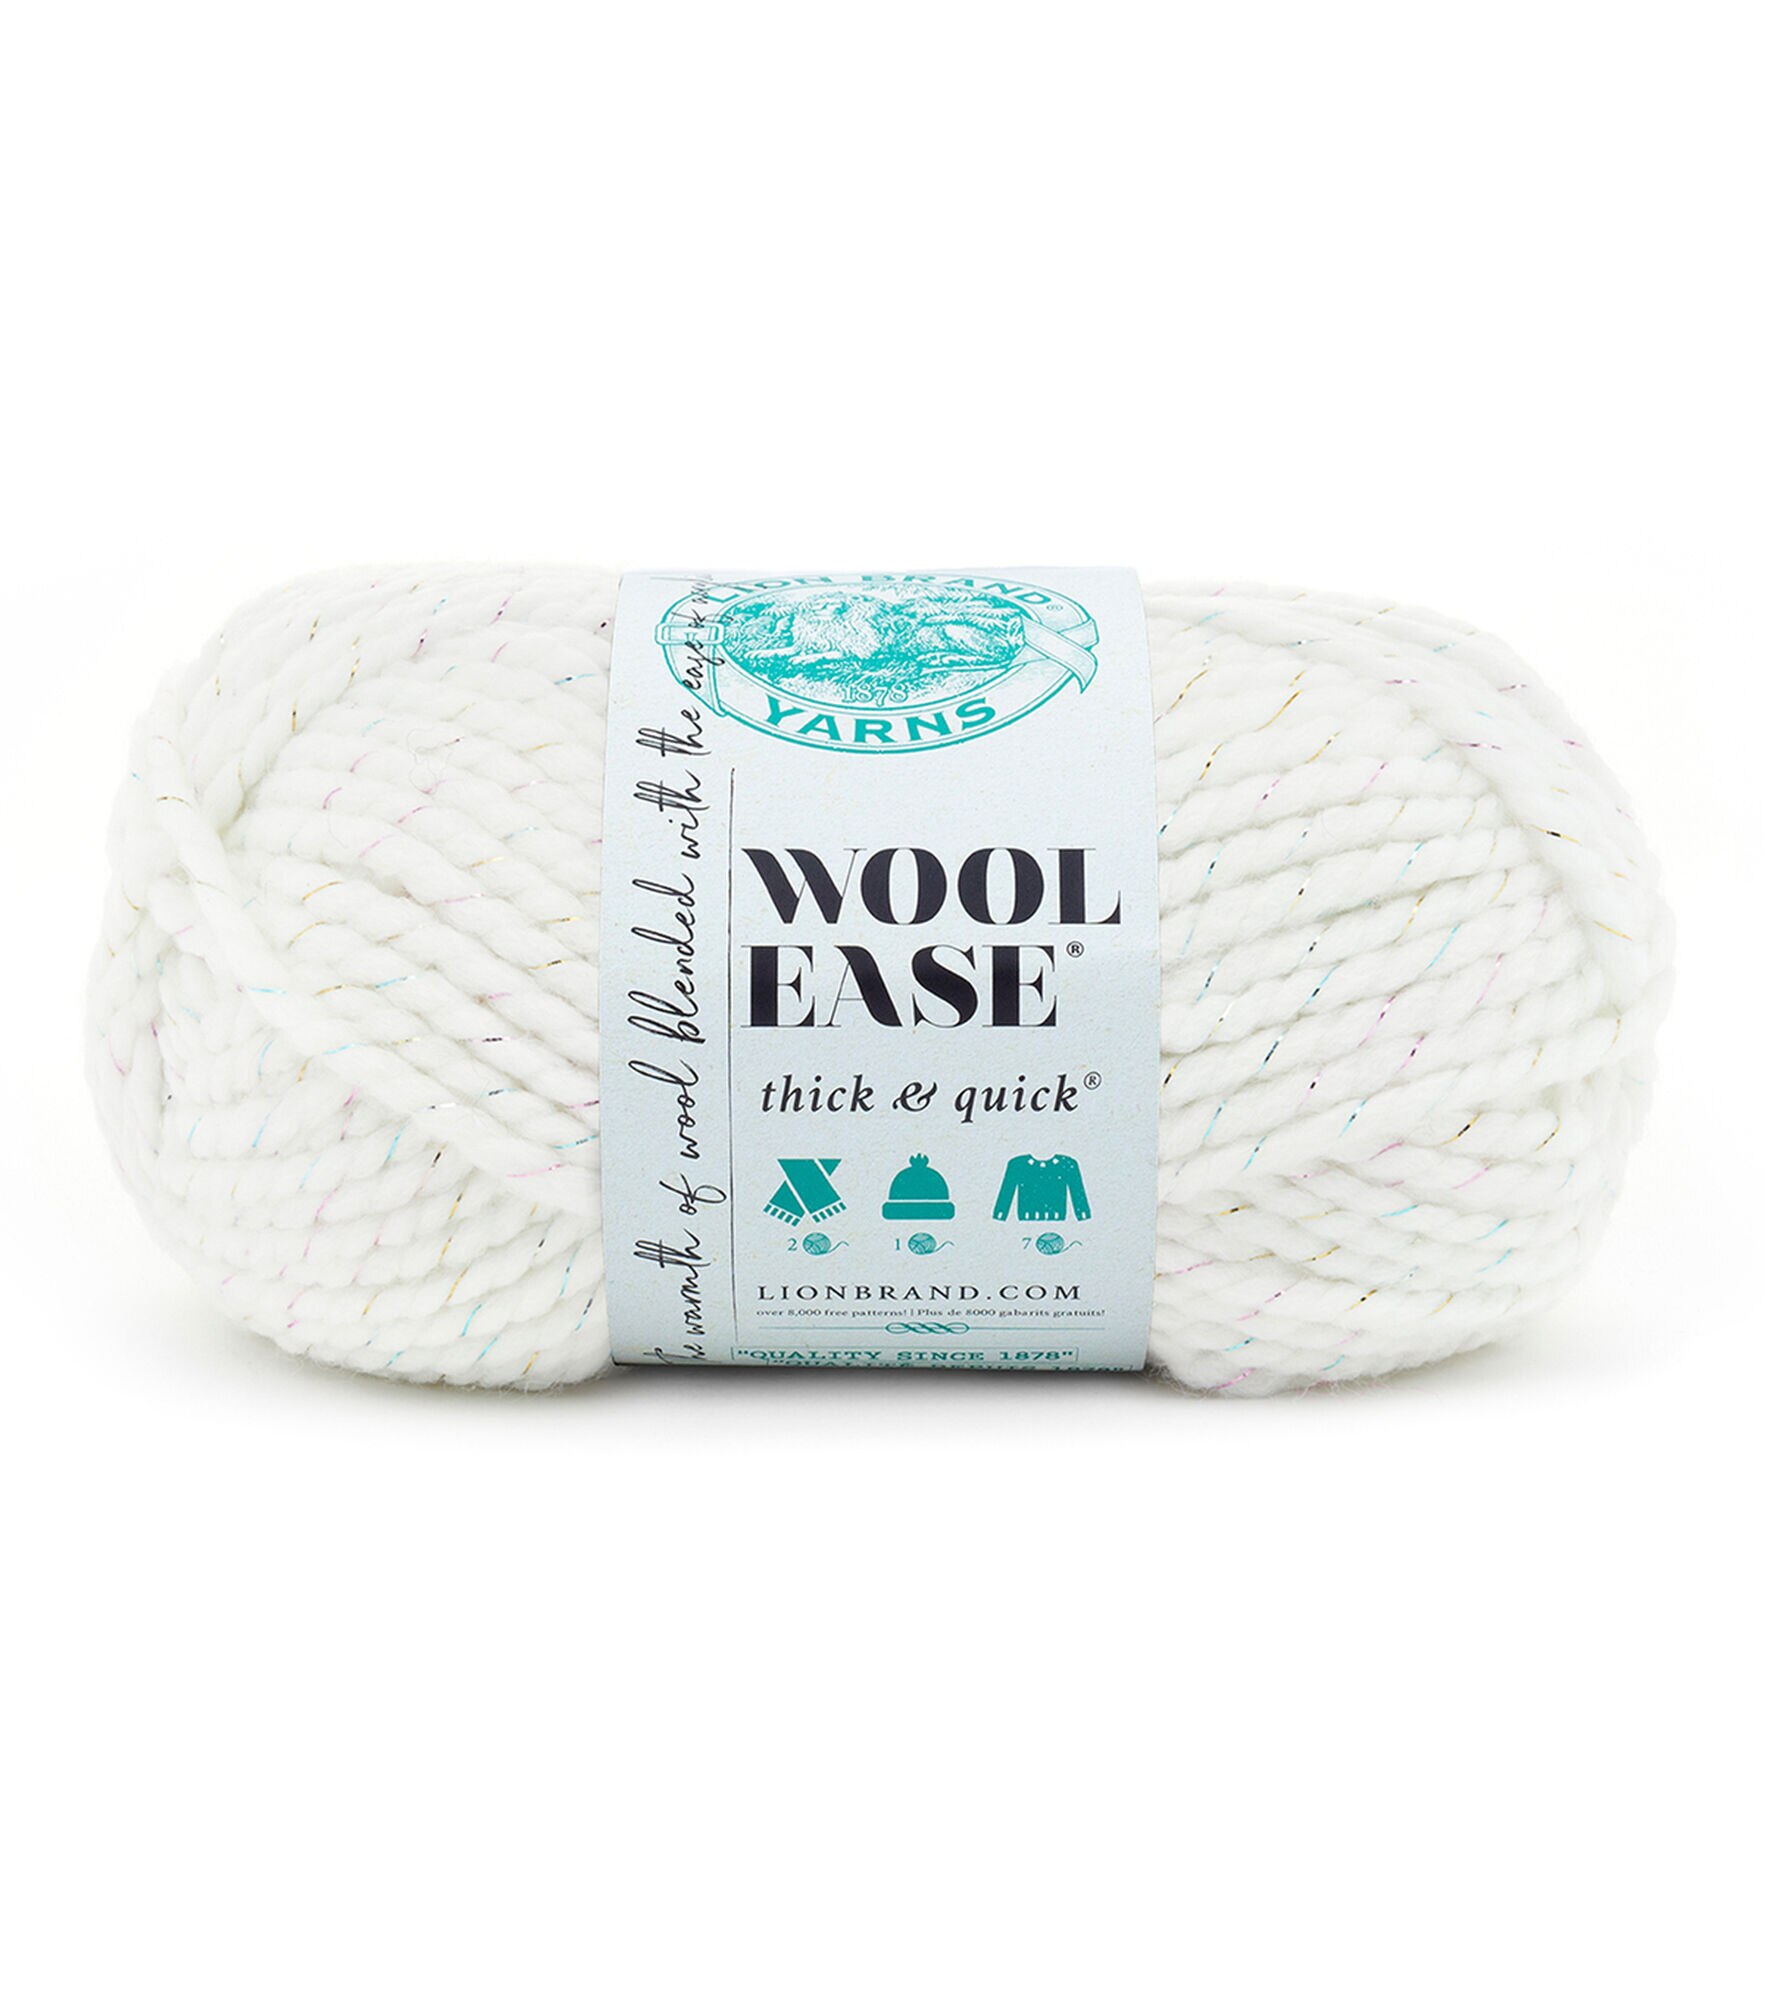 Lion Brand Yarn - Ovillo de lana 640-536 Wool-Ease Thick & Quick, color  fósil